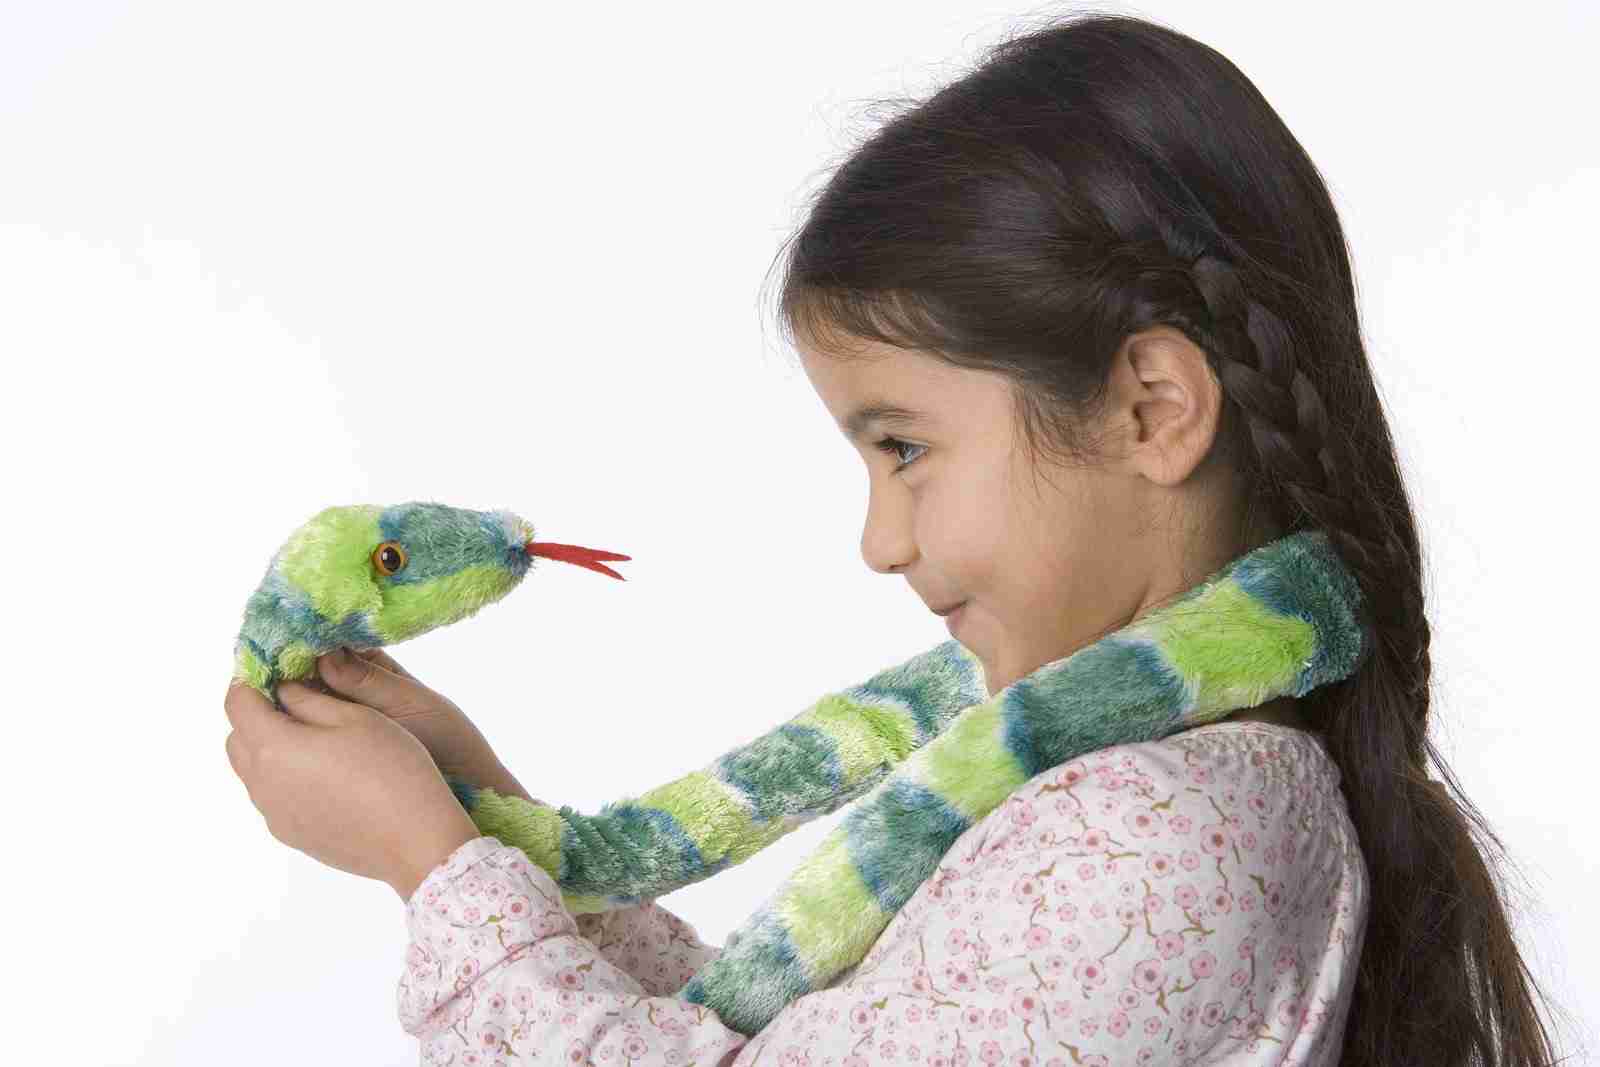 Best-Sellers for Wild Sales<br> Toys and Plush at Zoos, Aquariums and Museums